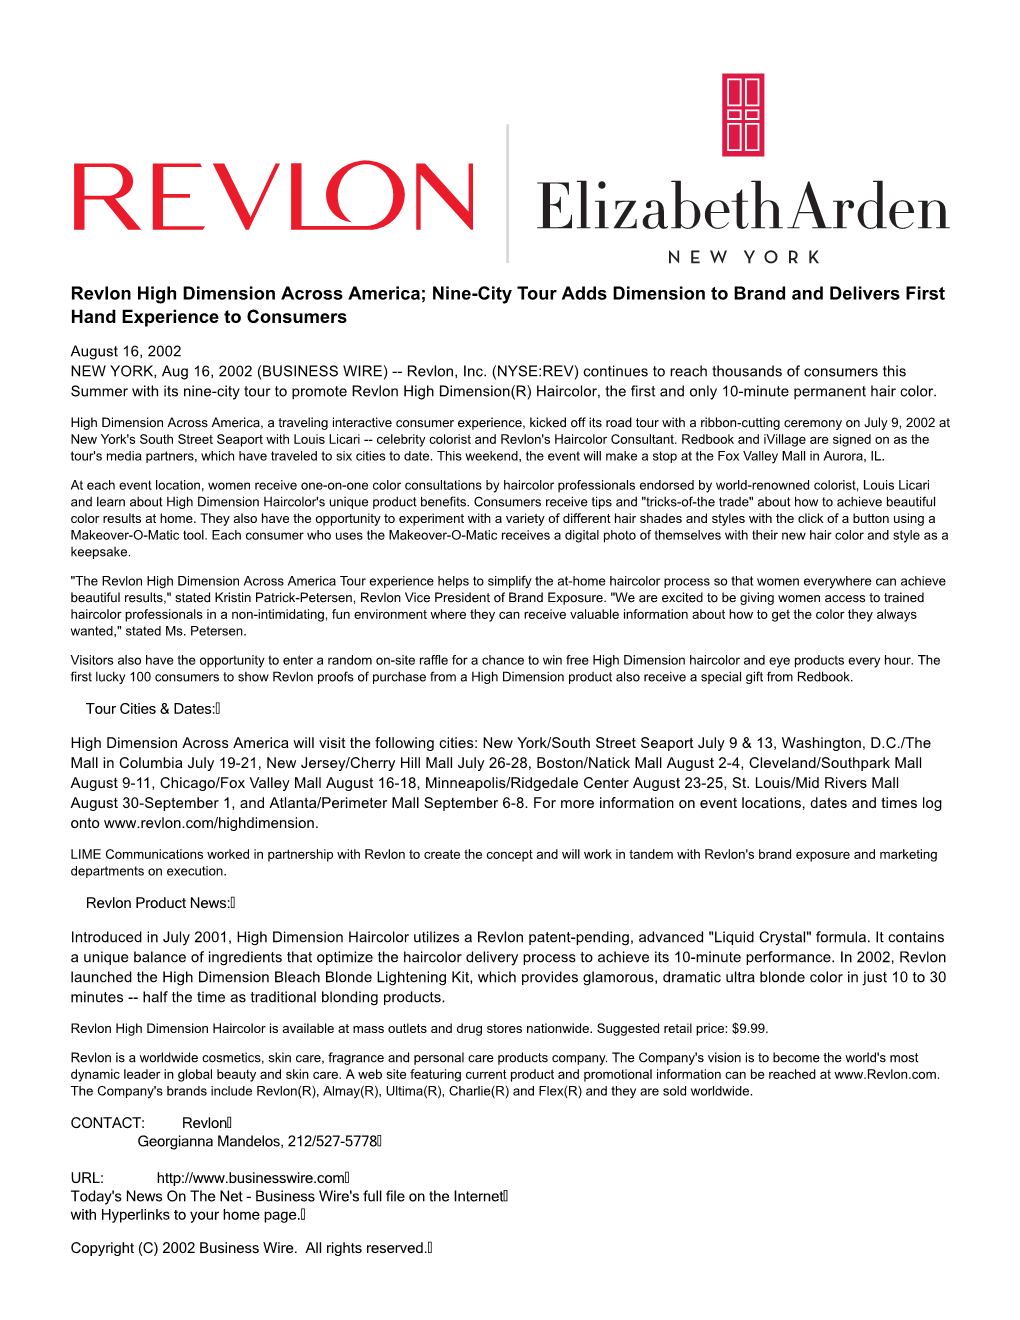 Revlon High Dimension Across America; Nine-City Tour Adds Dimension to Brand and Delivers First Hand Experience to Consumers